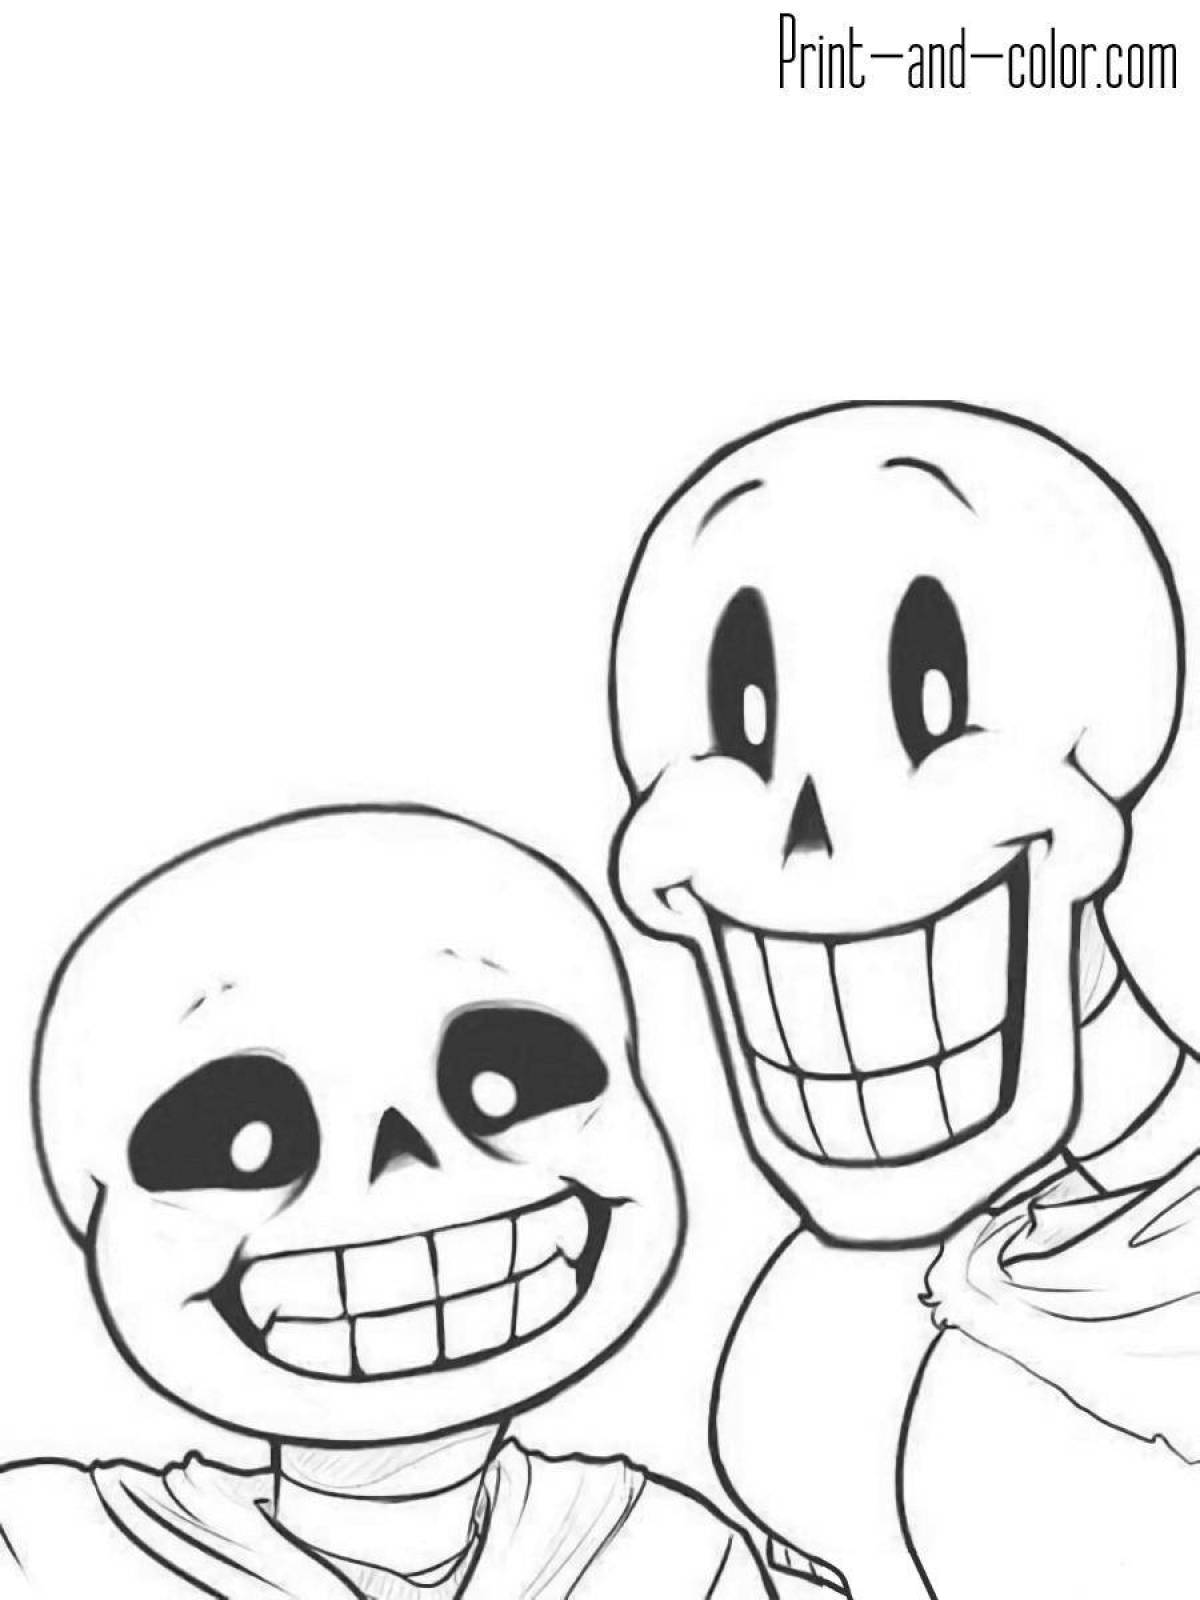 Coloring page cheerful papyrus